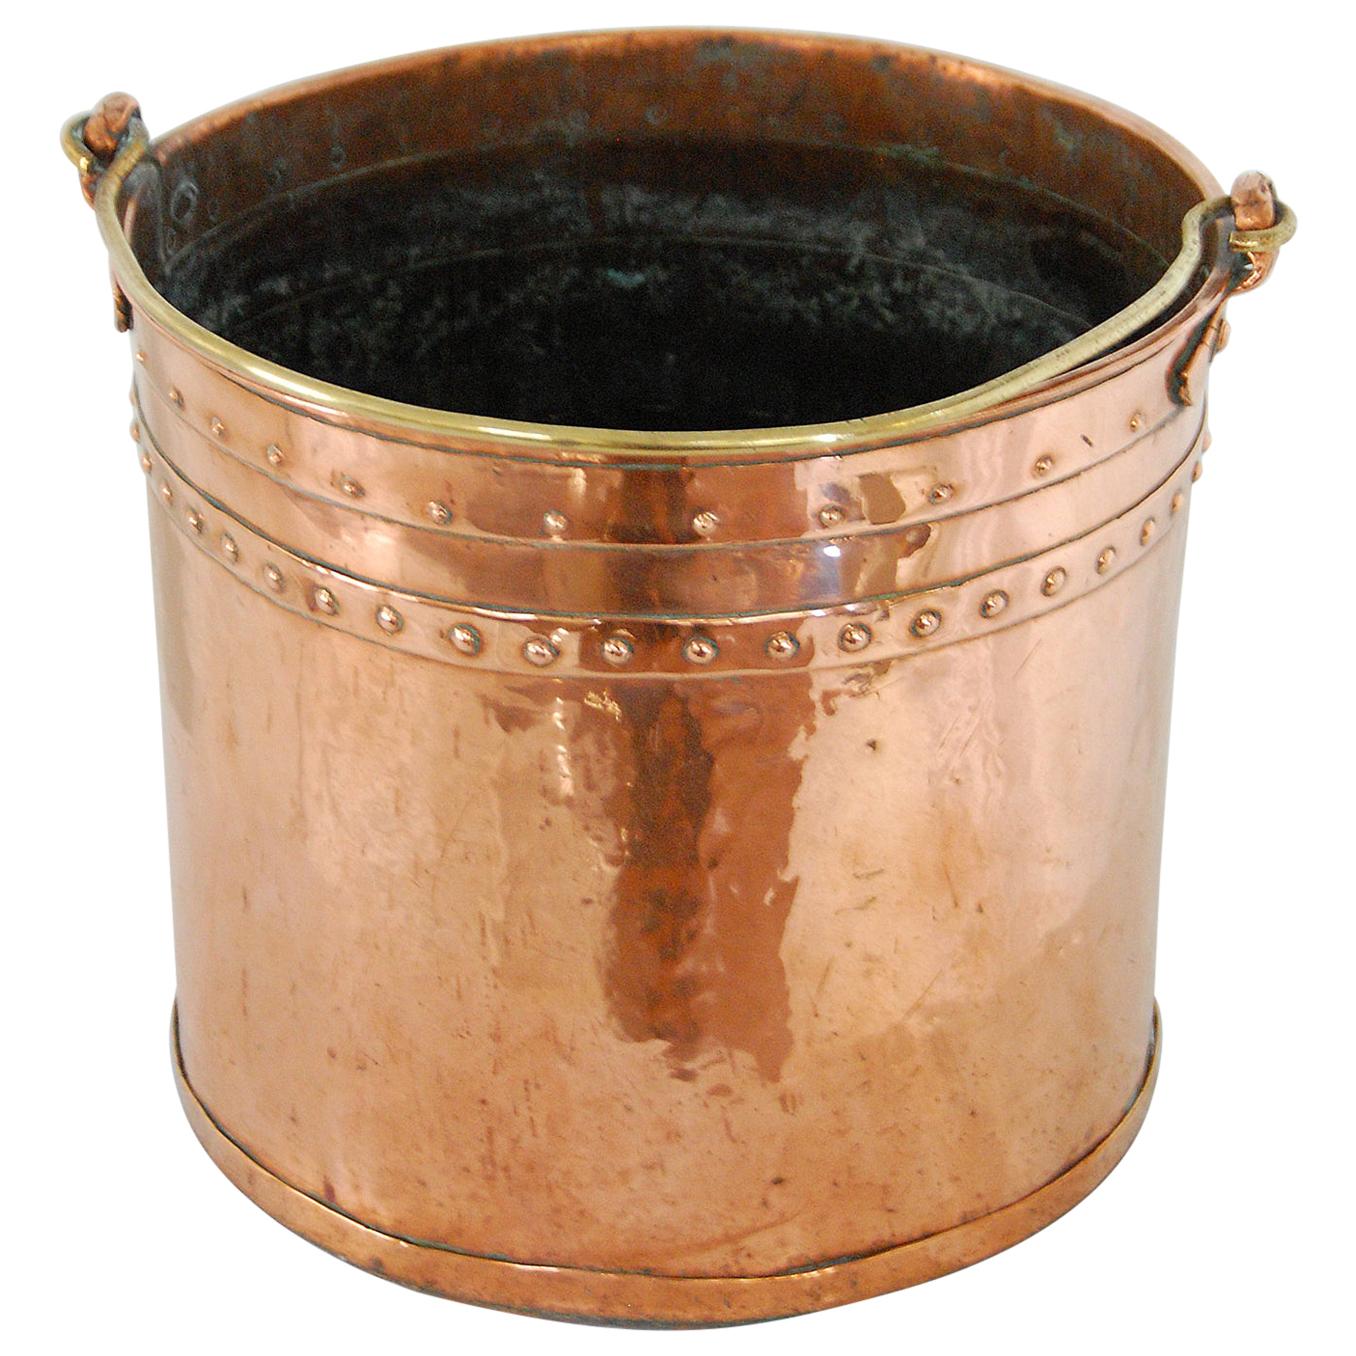 English 19th Century Copper Riveted Coal Bucket, Today for Logs or Plant